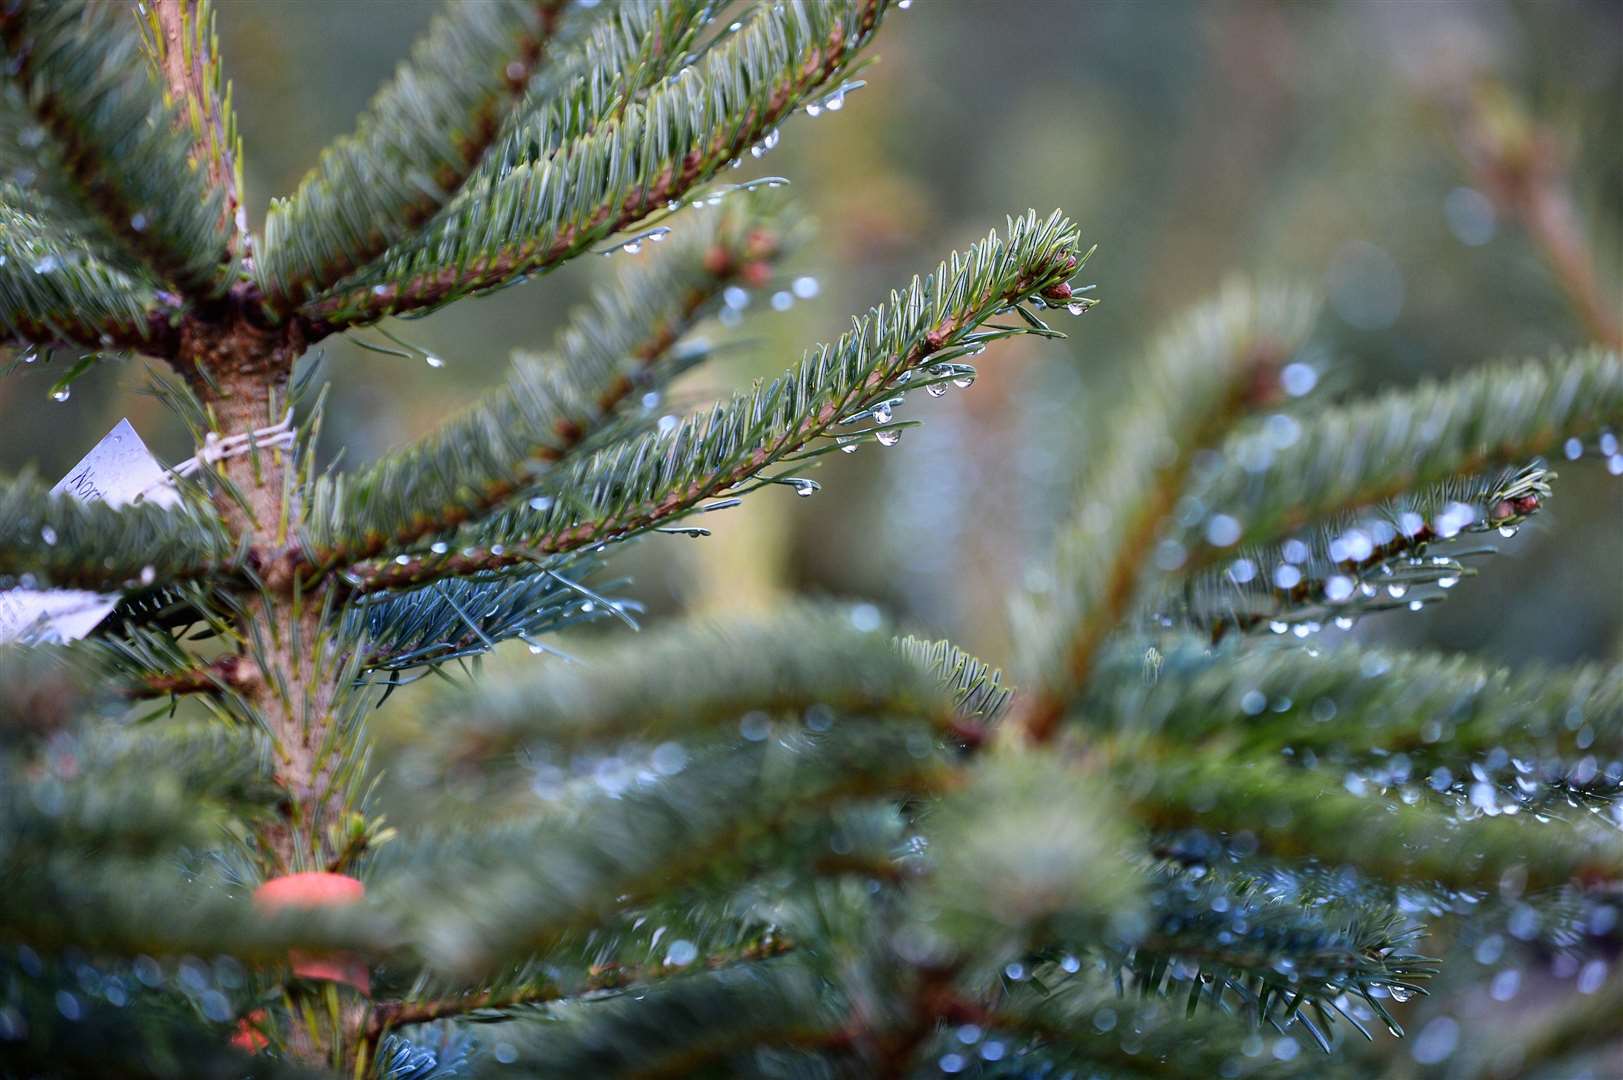 The sap and pine needles in real trees can cause some skin irritation